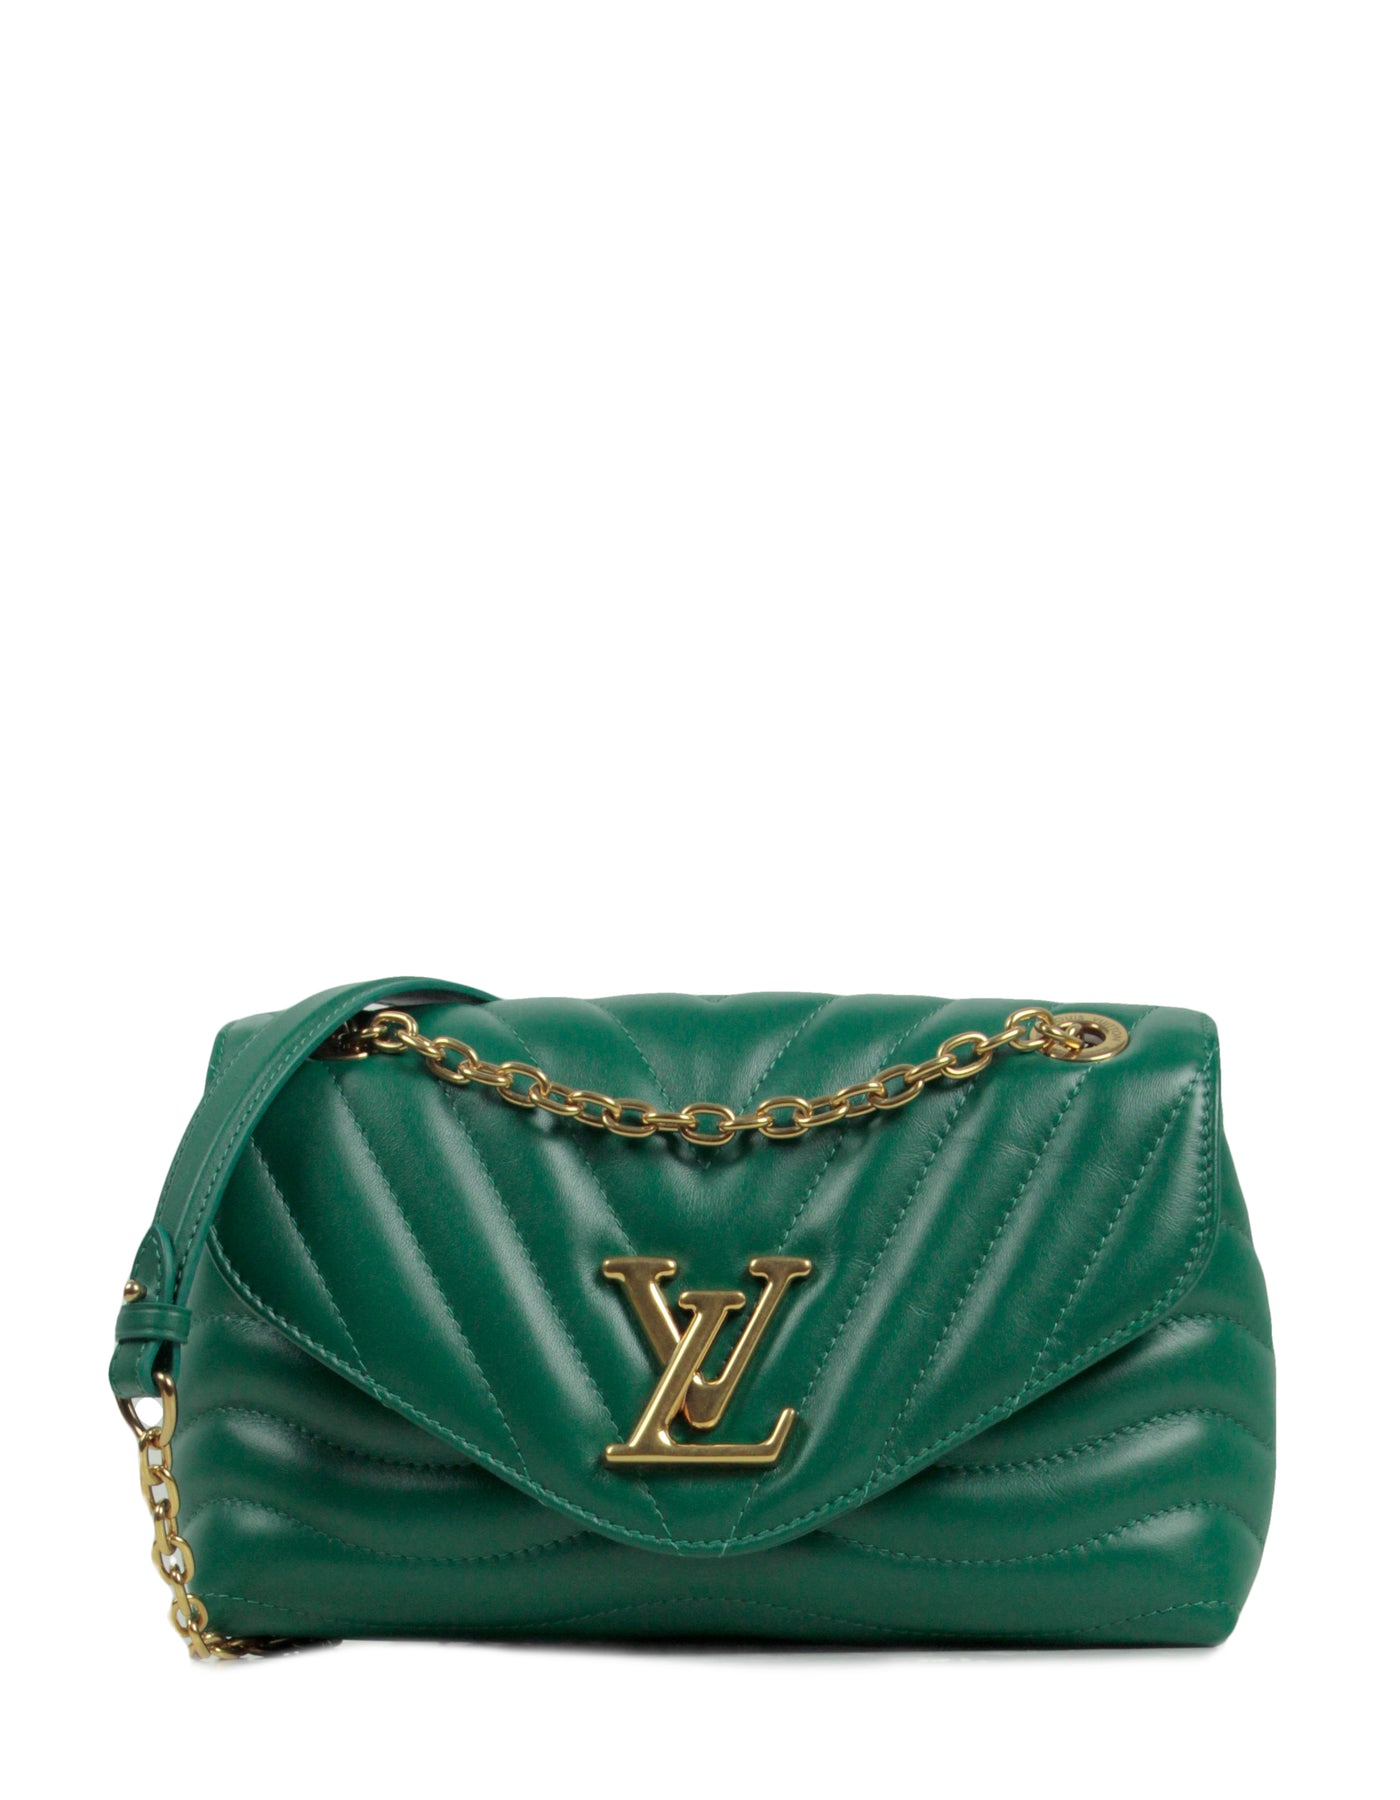 Louis Vuitton LV NEW WAVE CHAIN BAG IN EMERALD